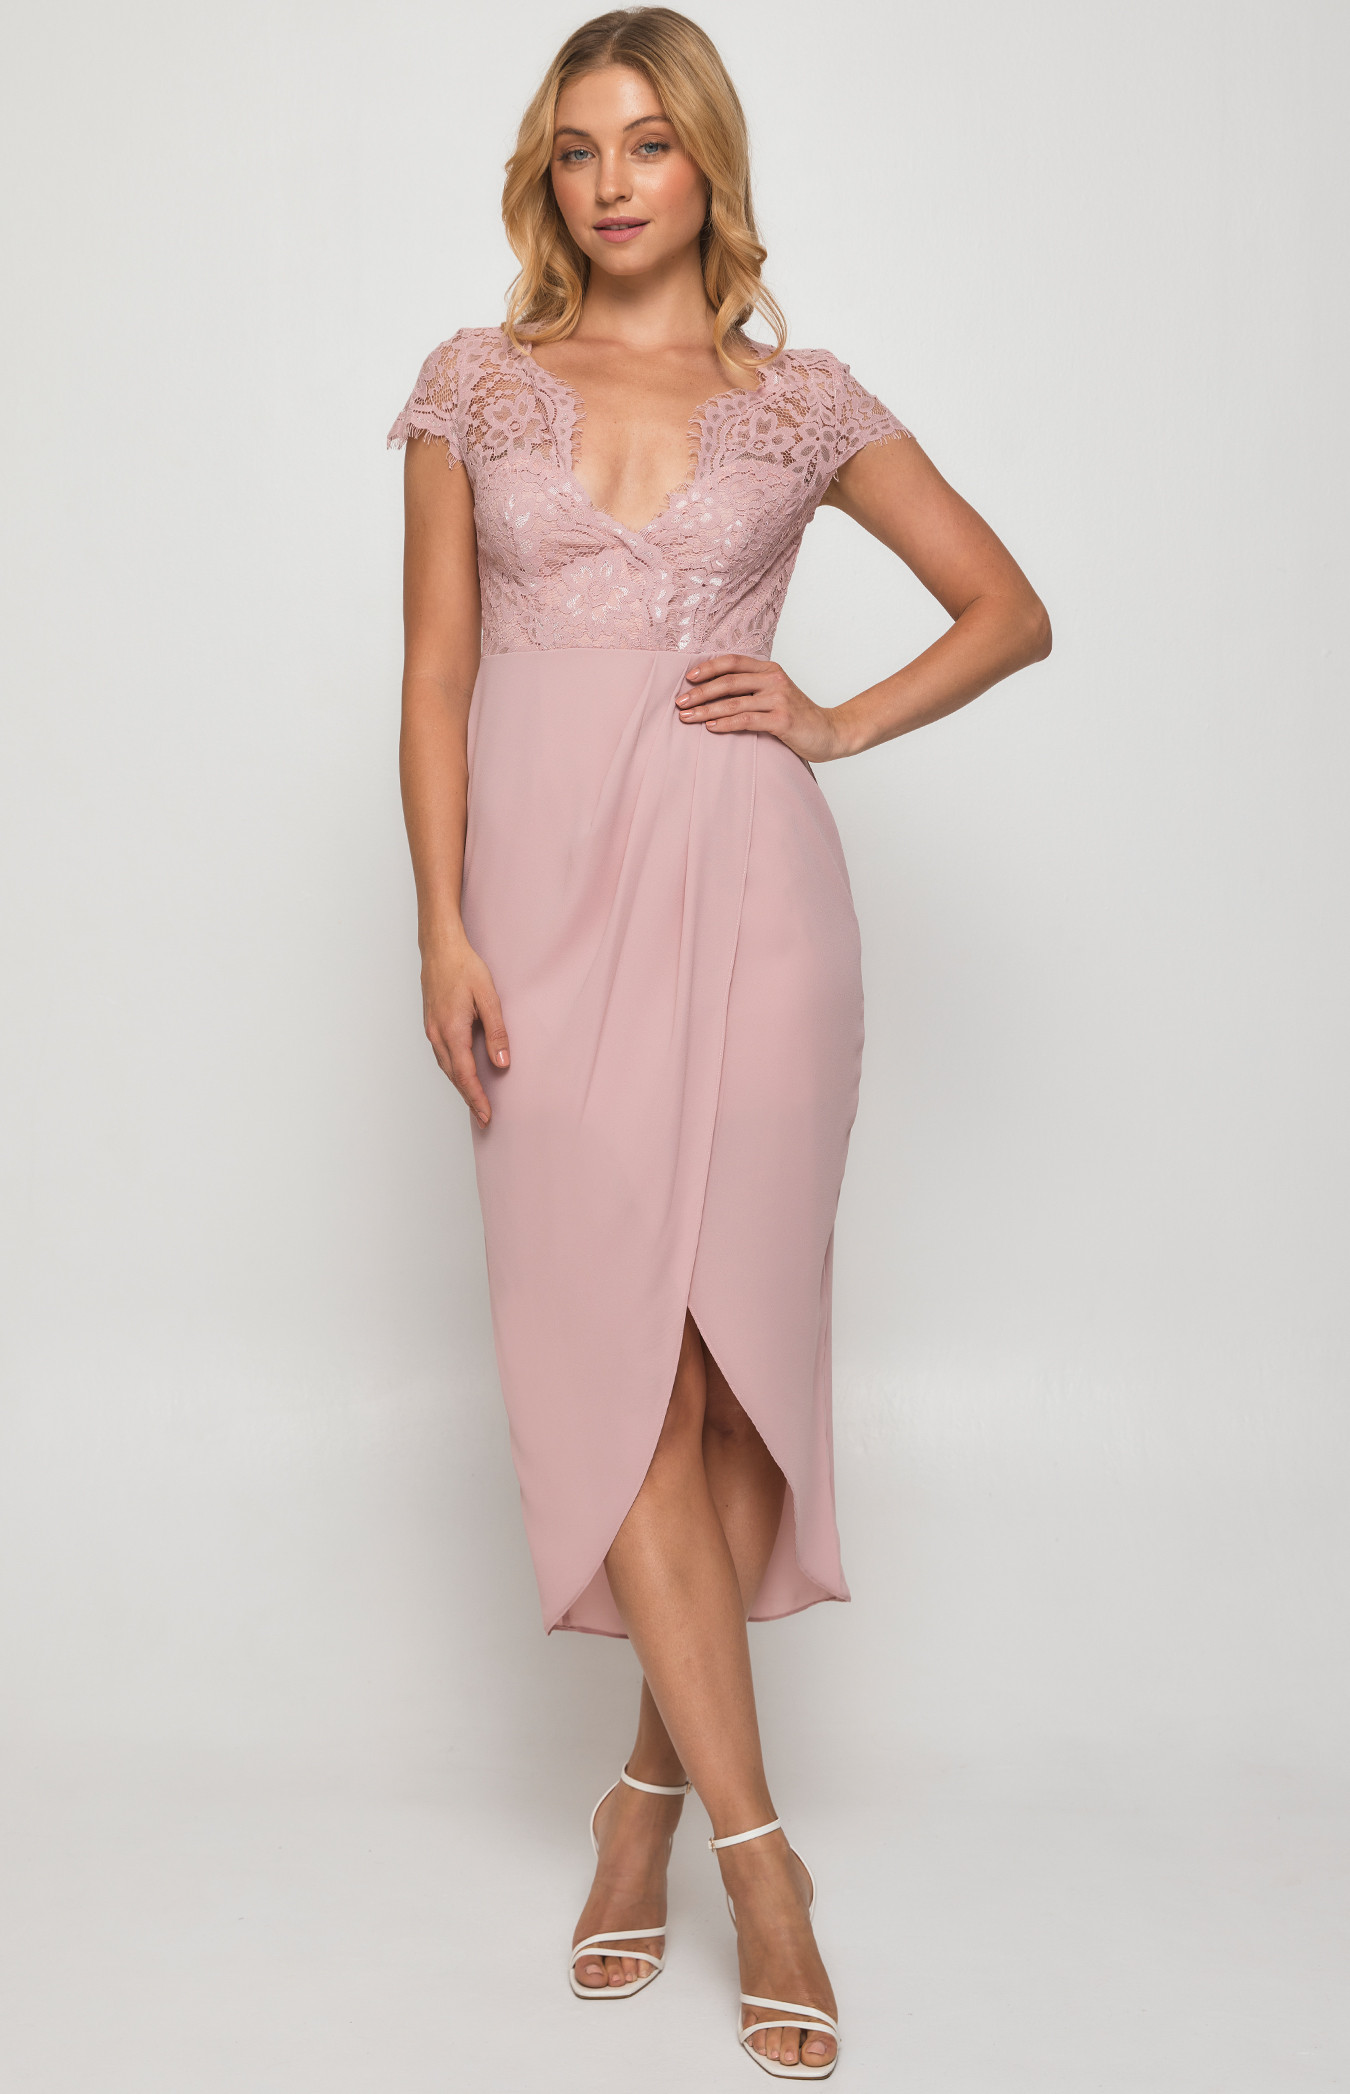 Asymmetric Hemline Dress with Embroidery Lace Top (SDR411A)